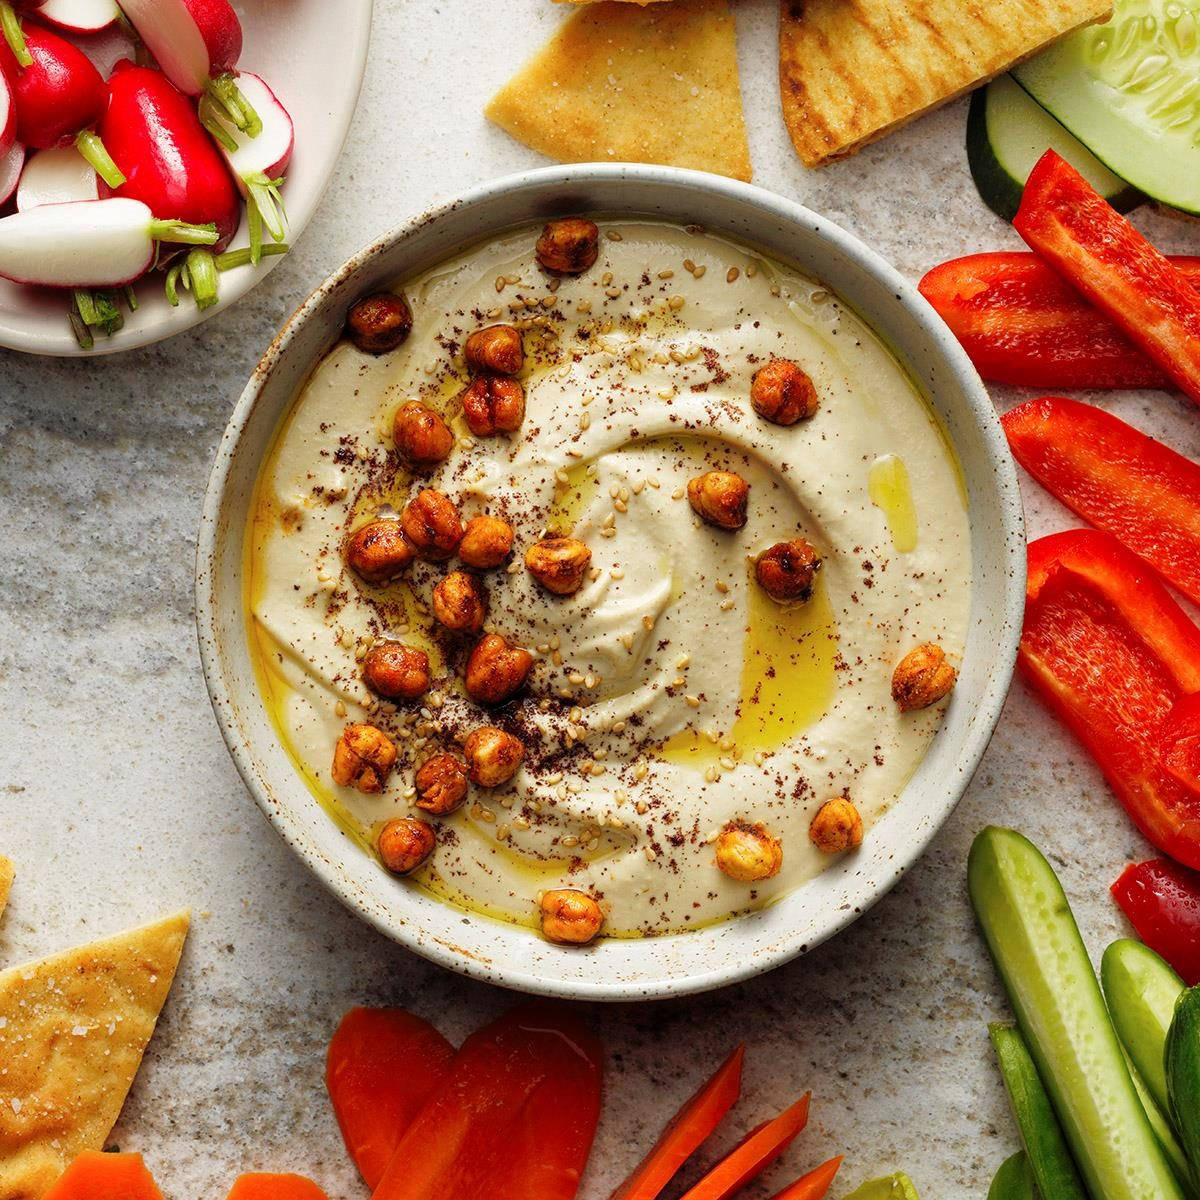 A wholesome bowl of hummus topped with nutritious brown chickpeas. Wallpaper